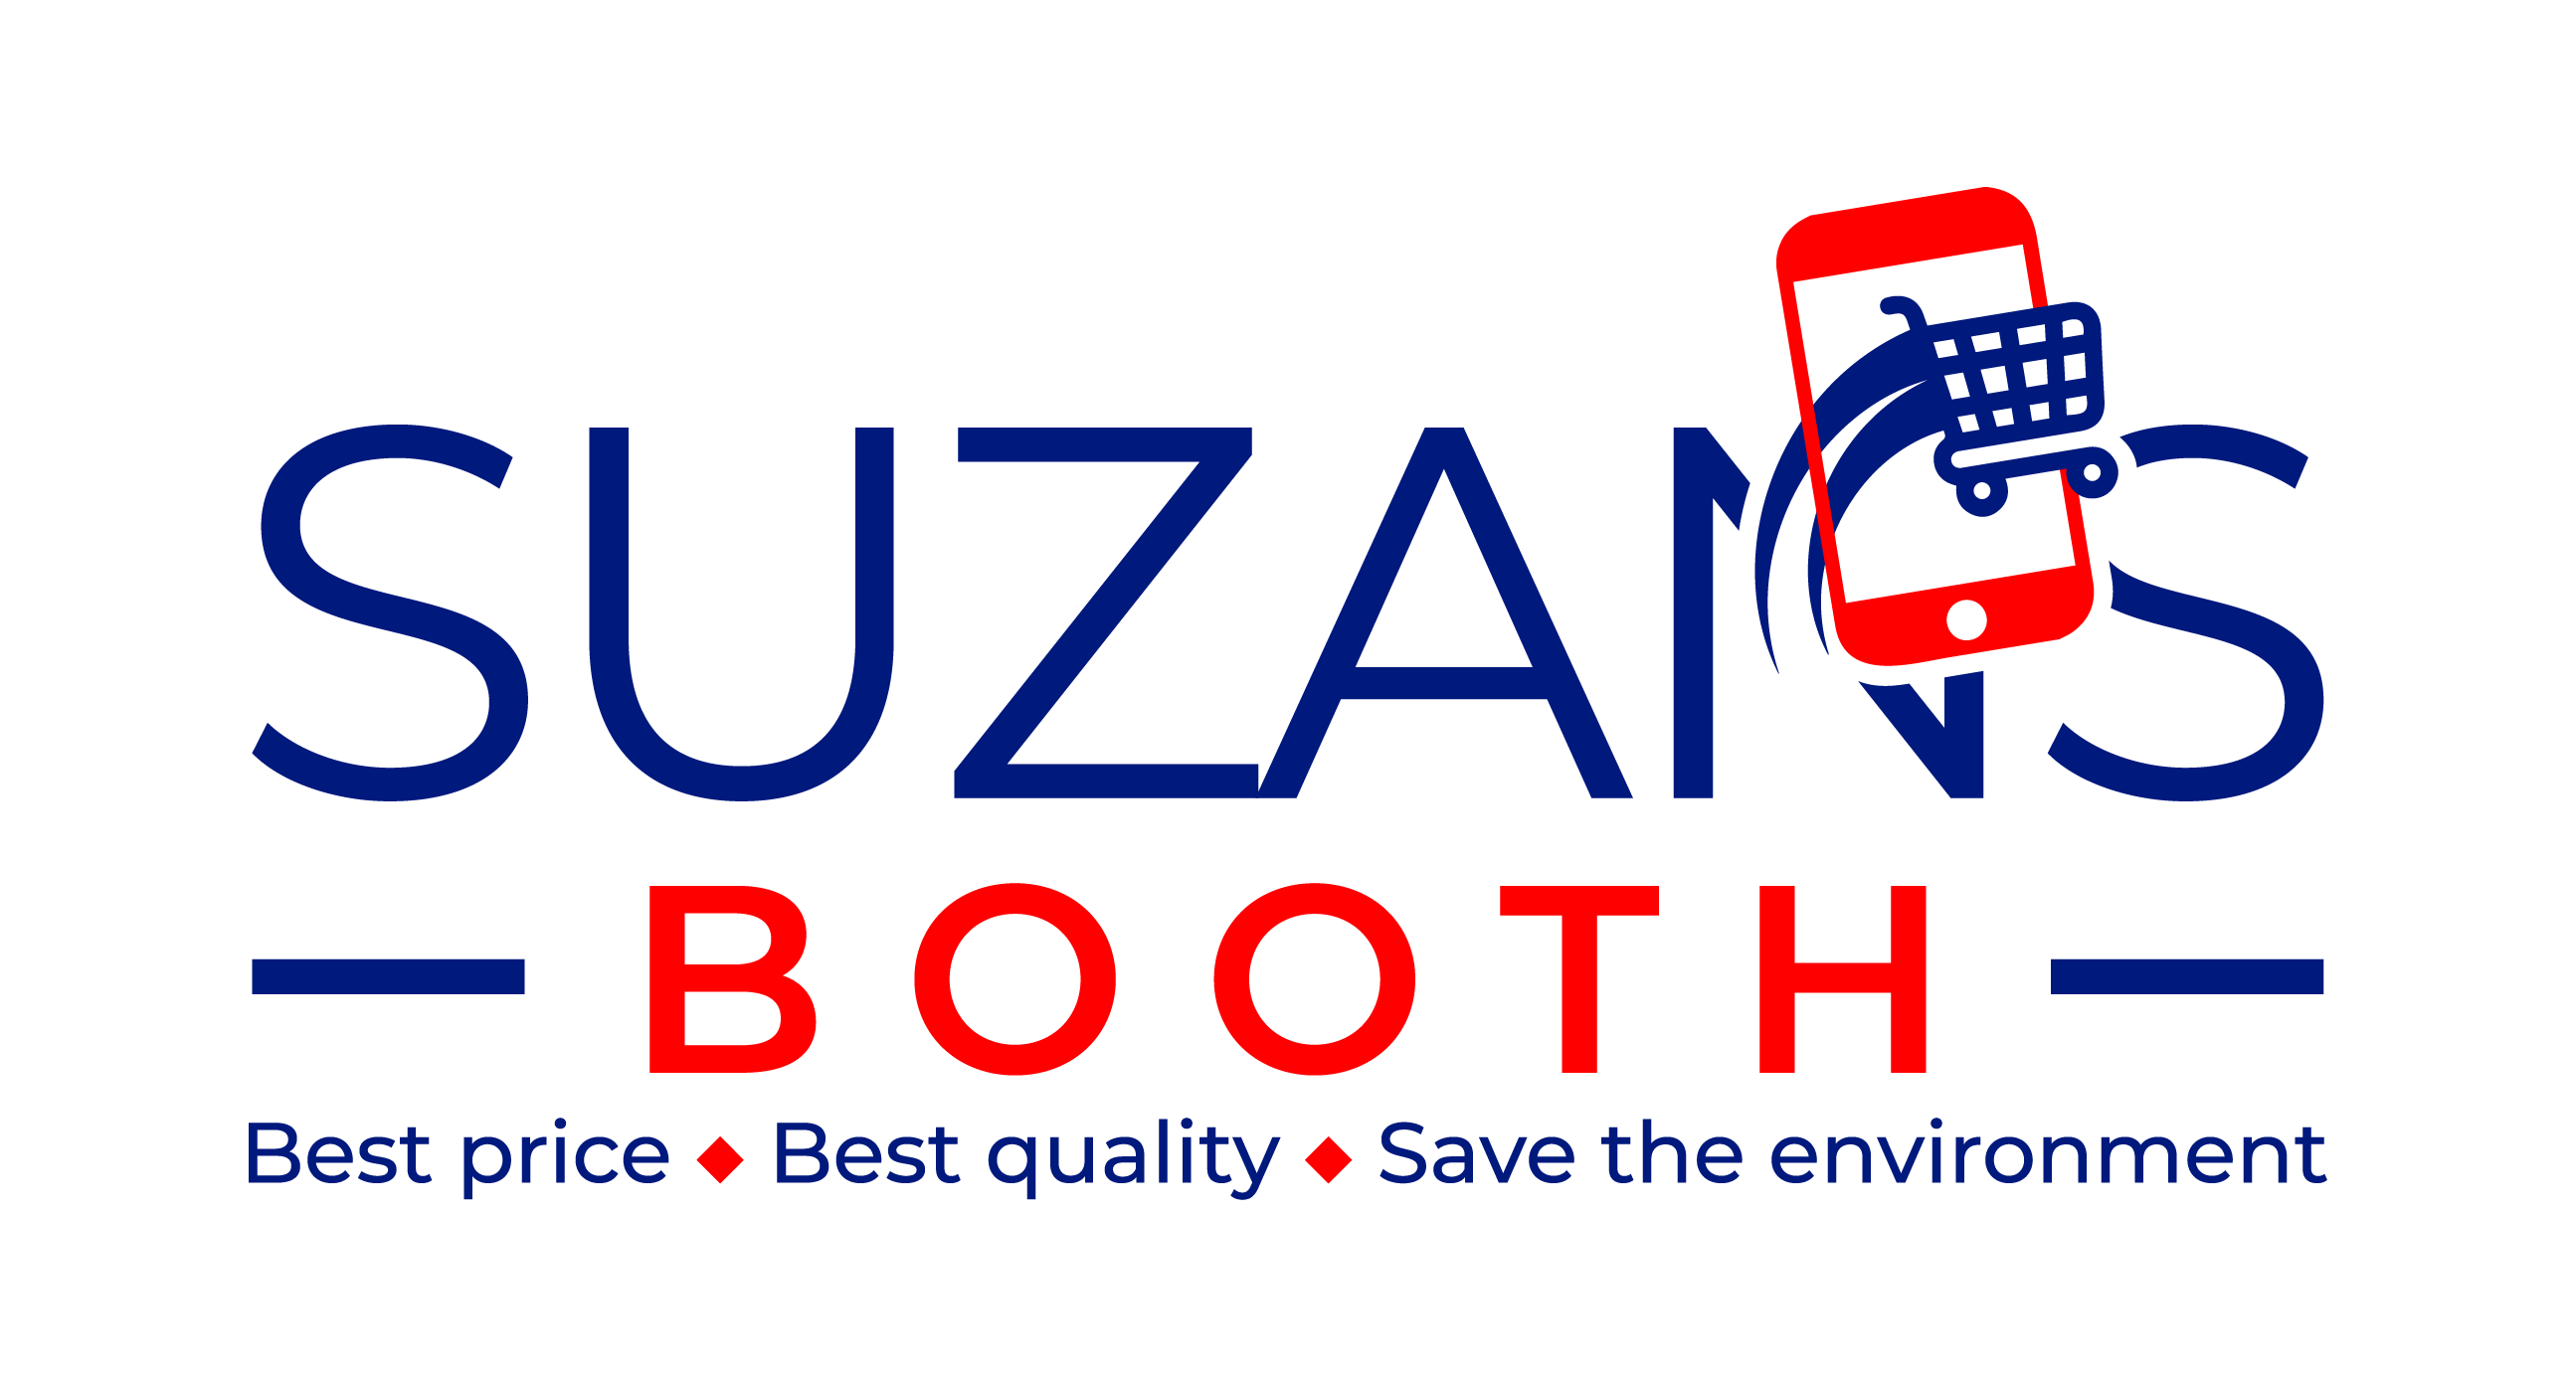 Suzansbooth